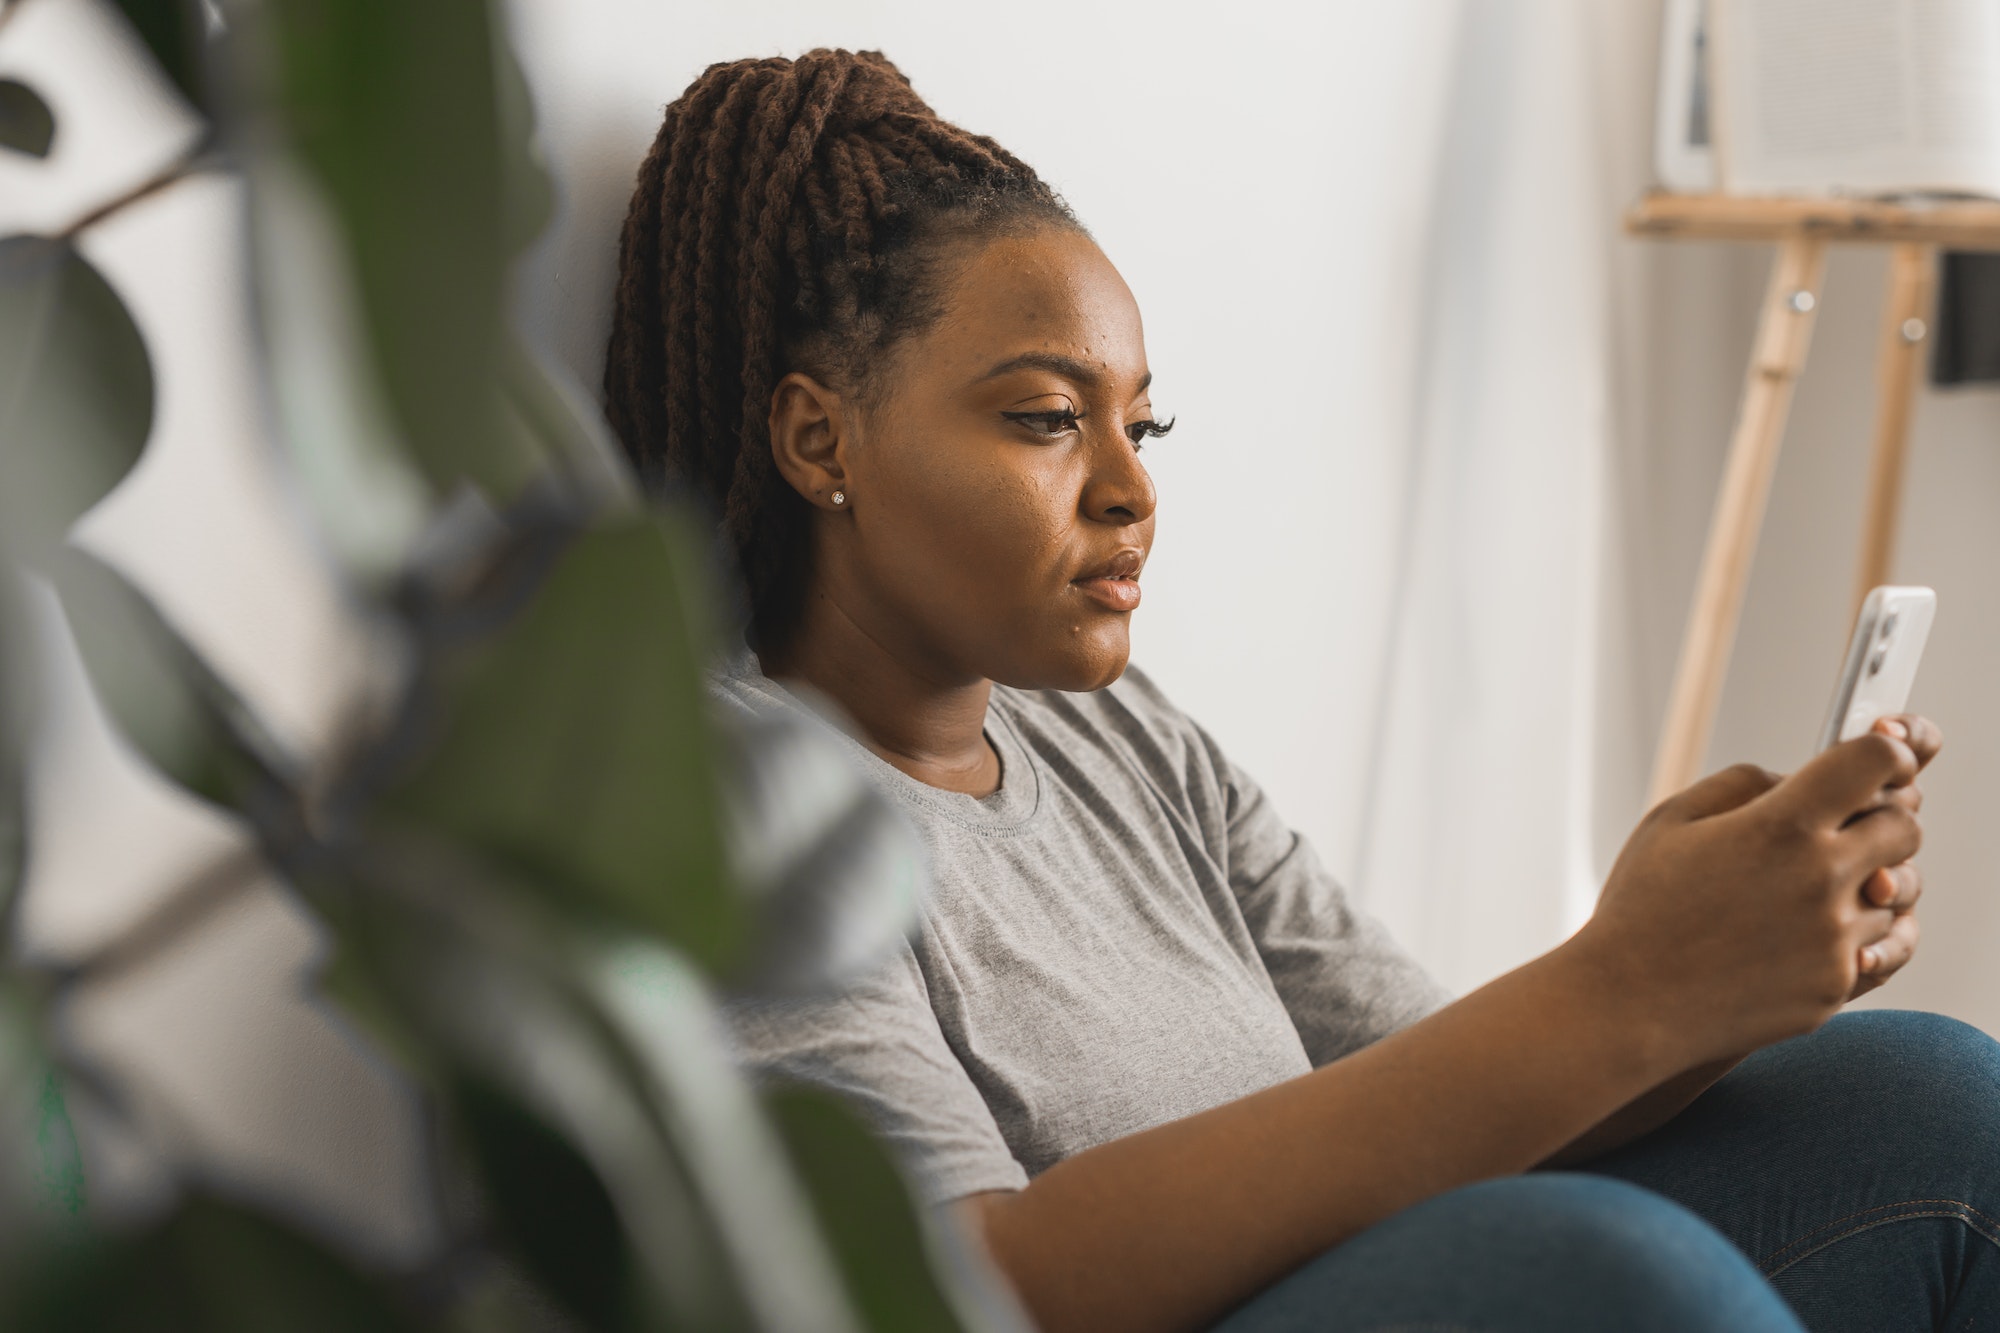 Portrait of African American female student dressed casually holding mobile phone and typing